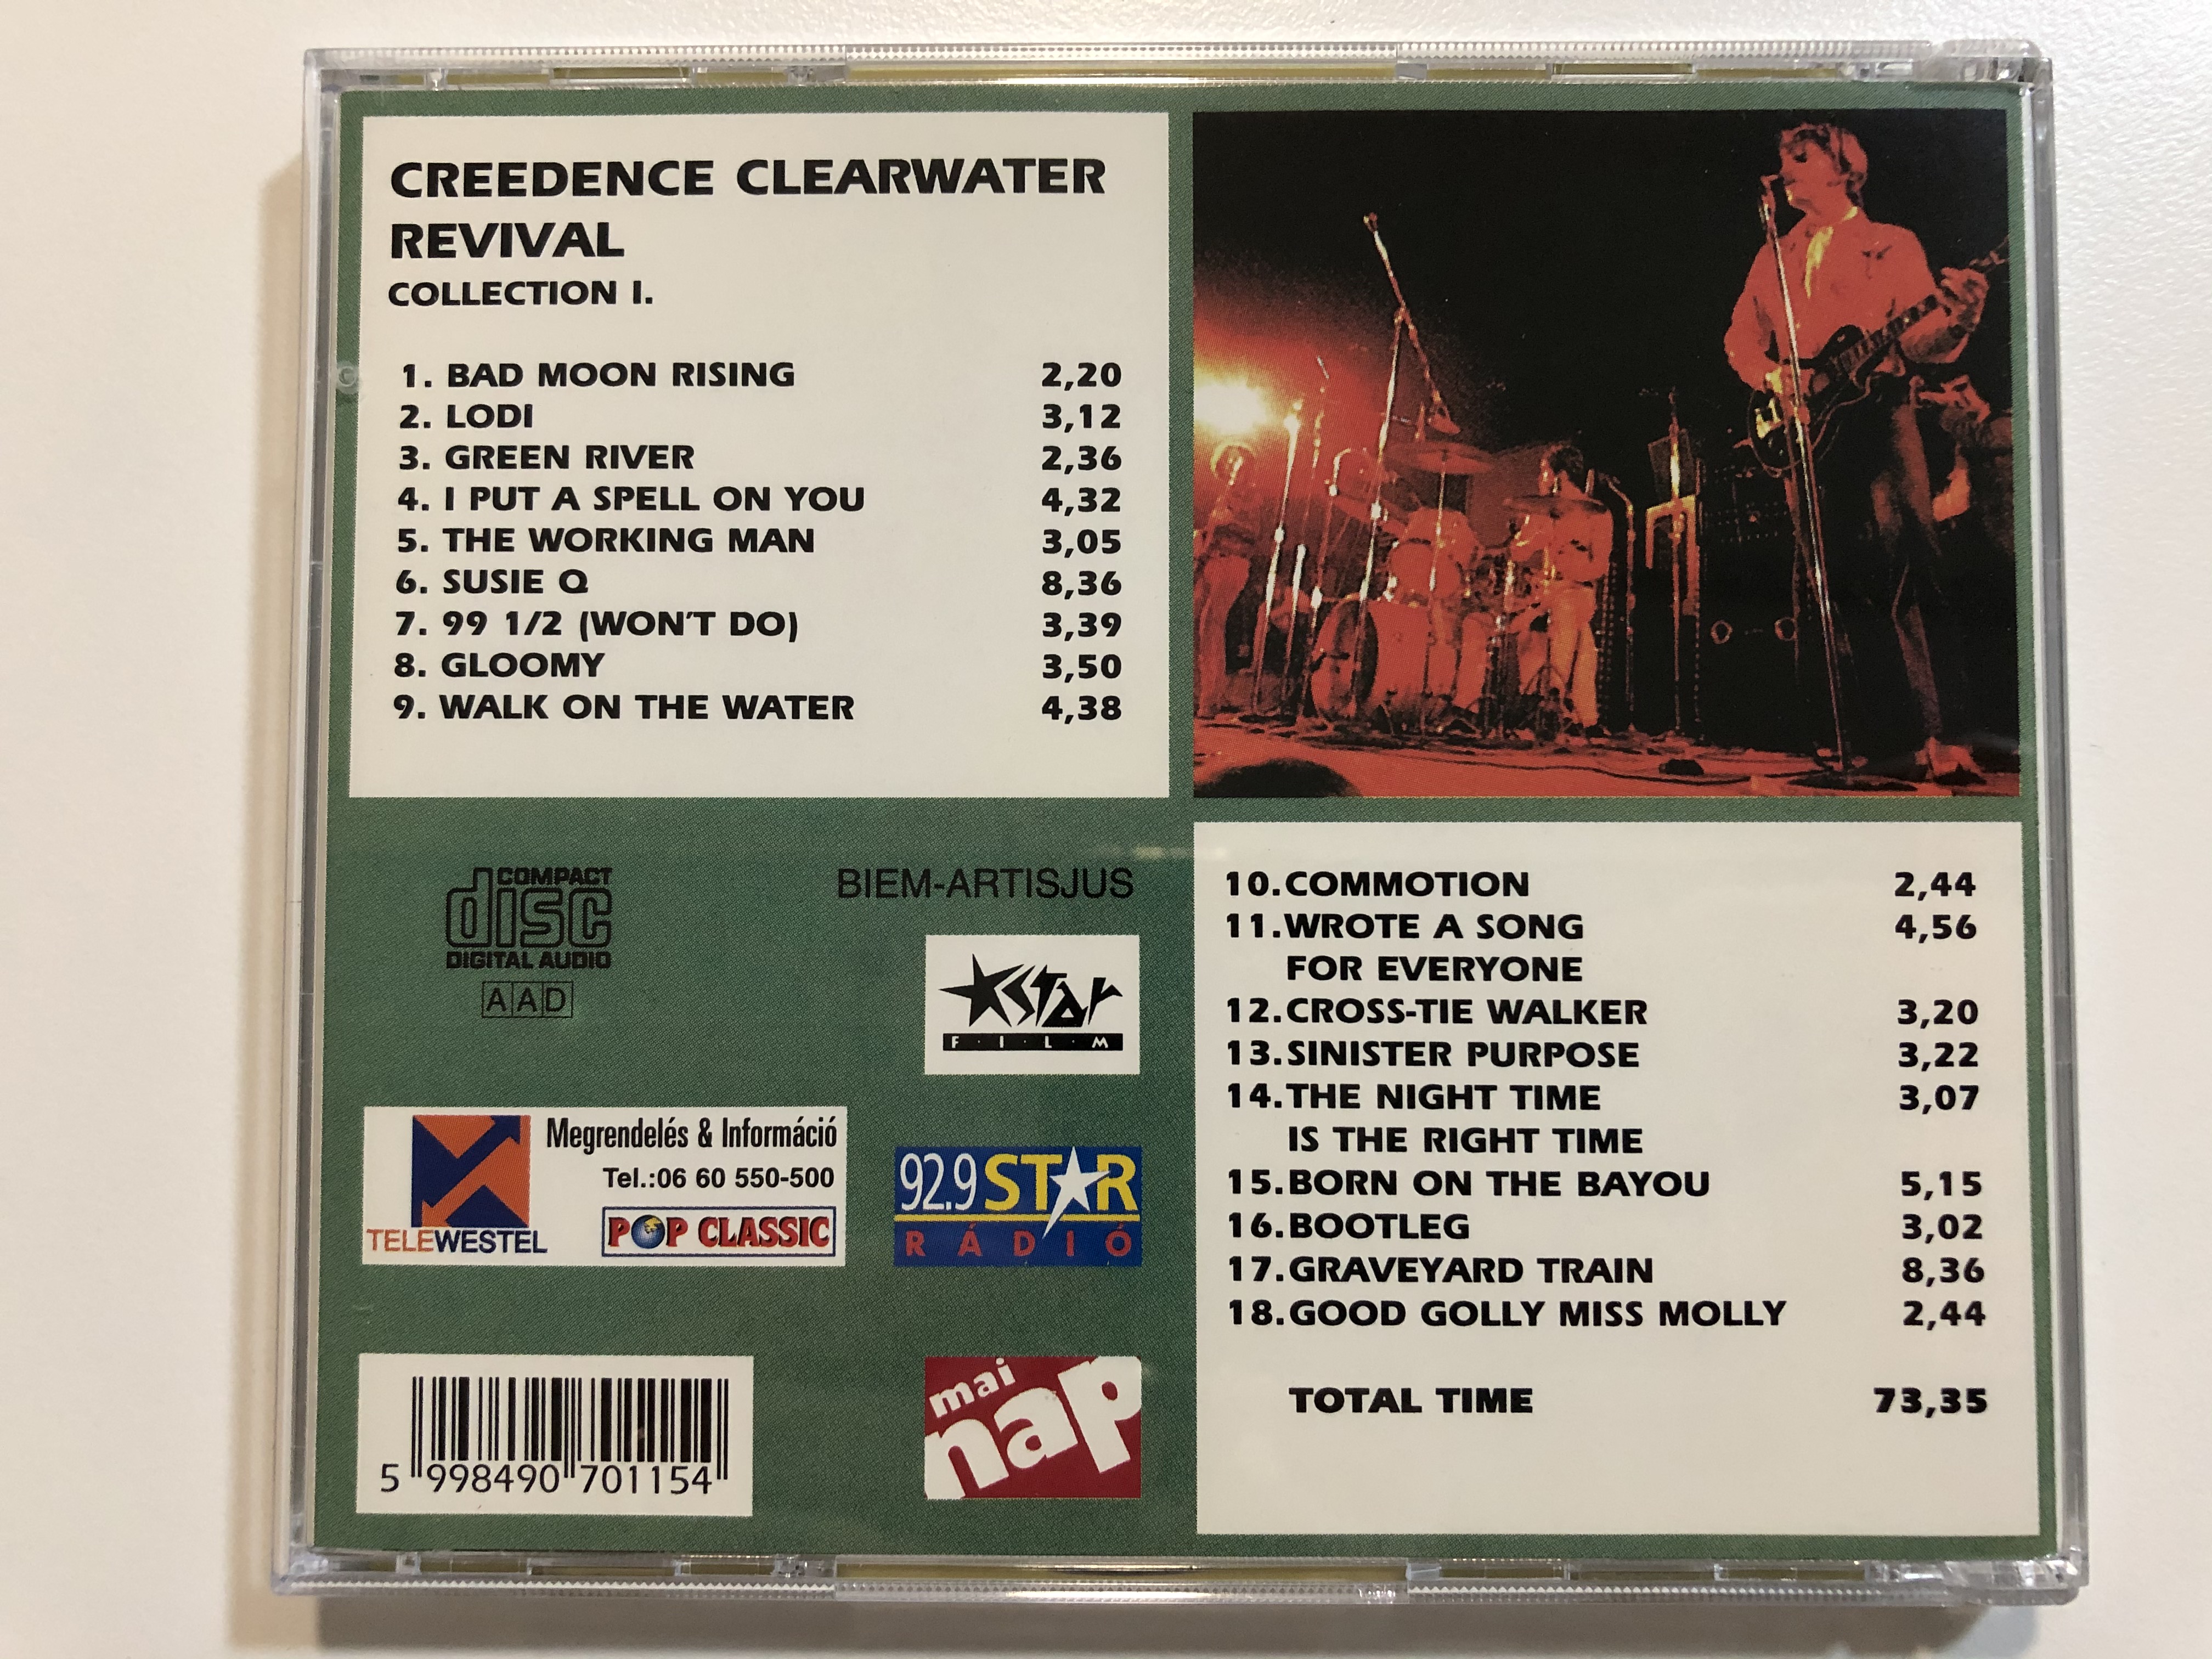 creedence-clearwater-revival-collection-i.-total-time-7335-euroton-audio-cd-eucd-0115-2-.jpg